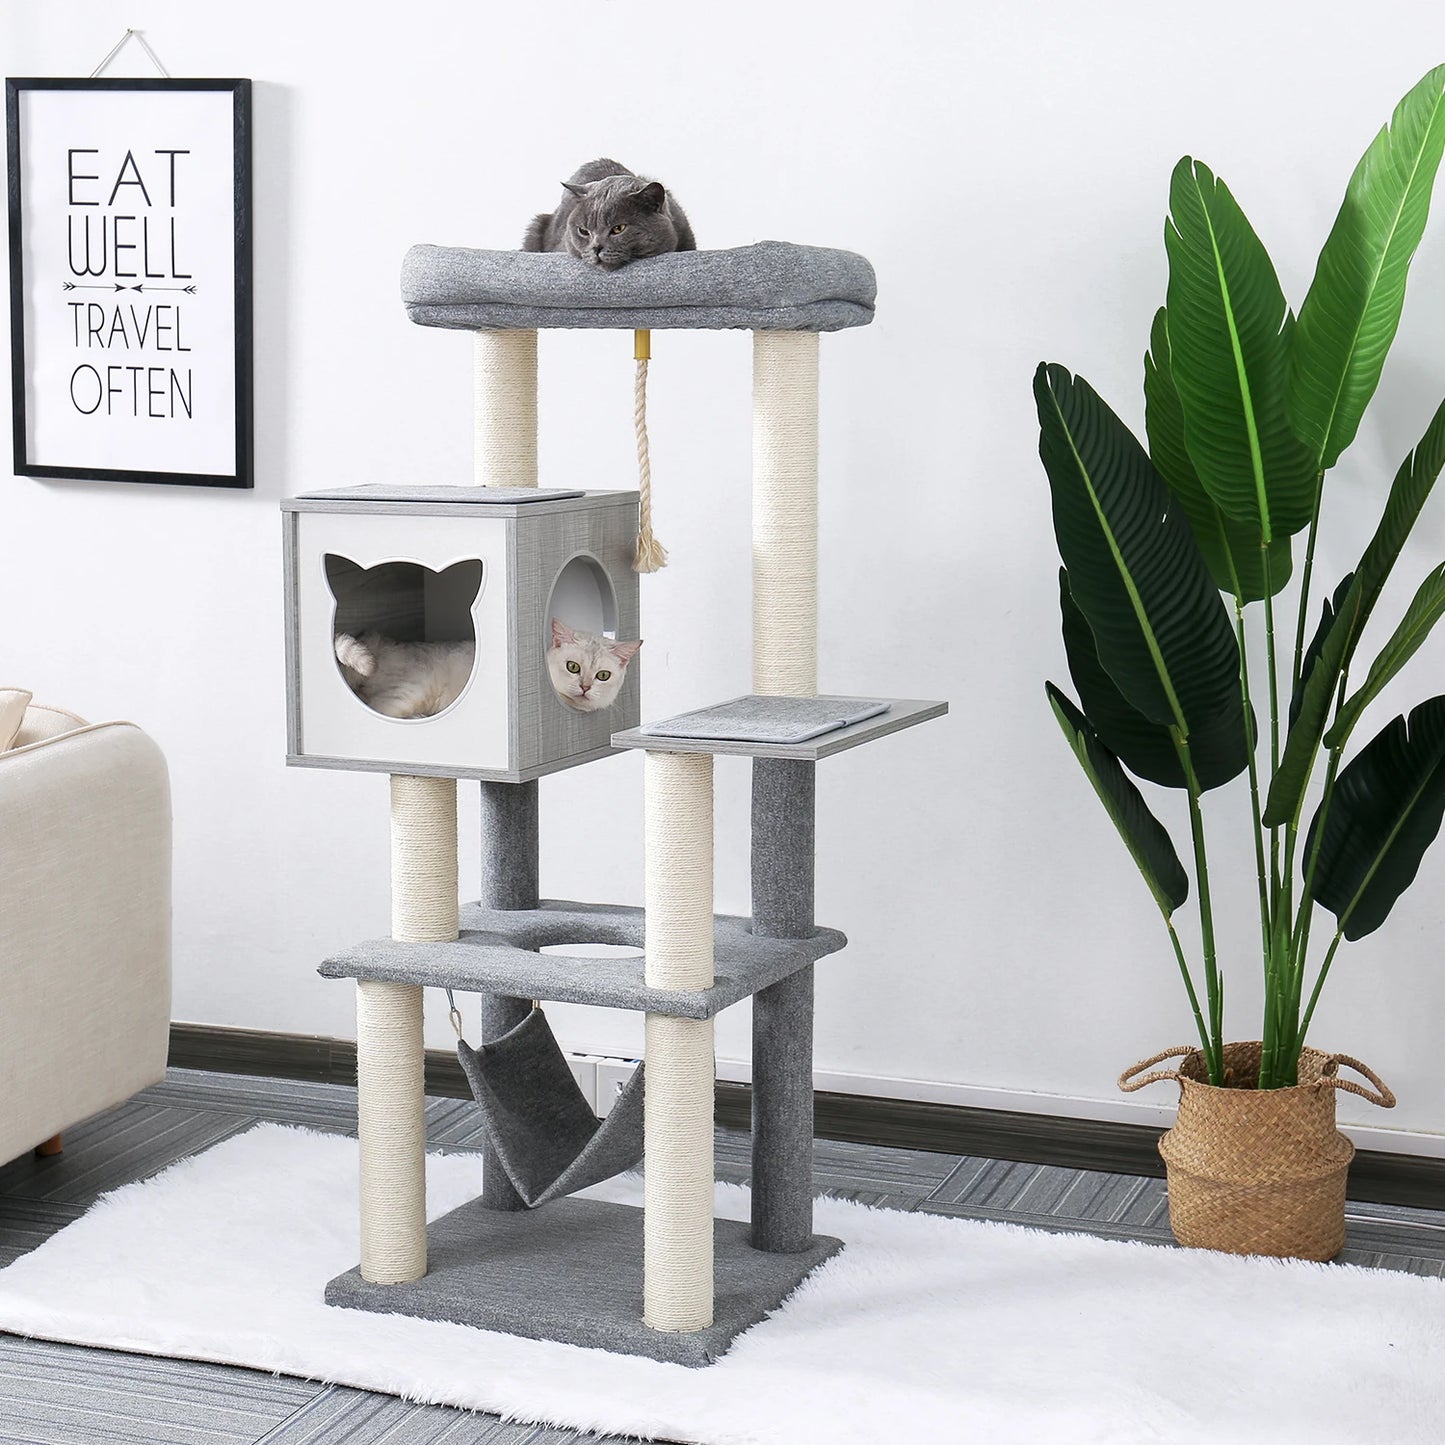 Funny Cats Tree Condo House Scratching Posts for Cats Kitten Wood Multi-Level Tower Toys Jumping Climbing for Cats Fast Shipping